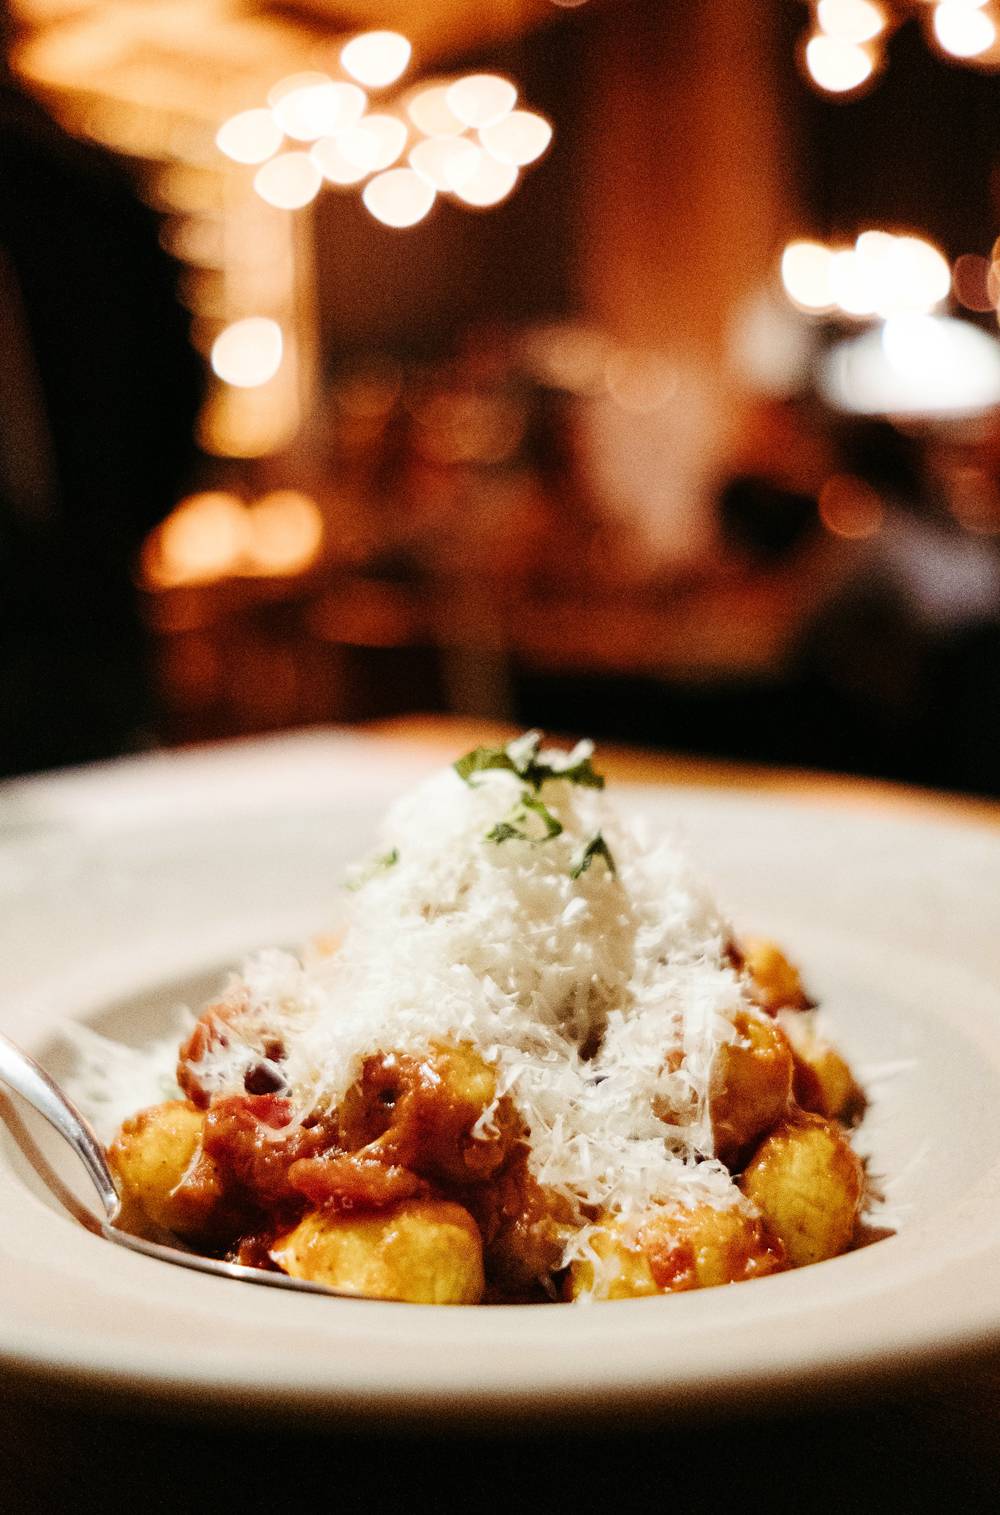 A side view of the daily gnocchi special at NAYA. Gnocchi are served in a large, gray ceramic dish. The gnocchi are garnished very generously with grated parmesan cheese. A metal spoon sits in the dish. Photo by Anna Longworth.